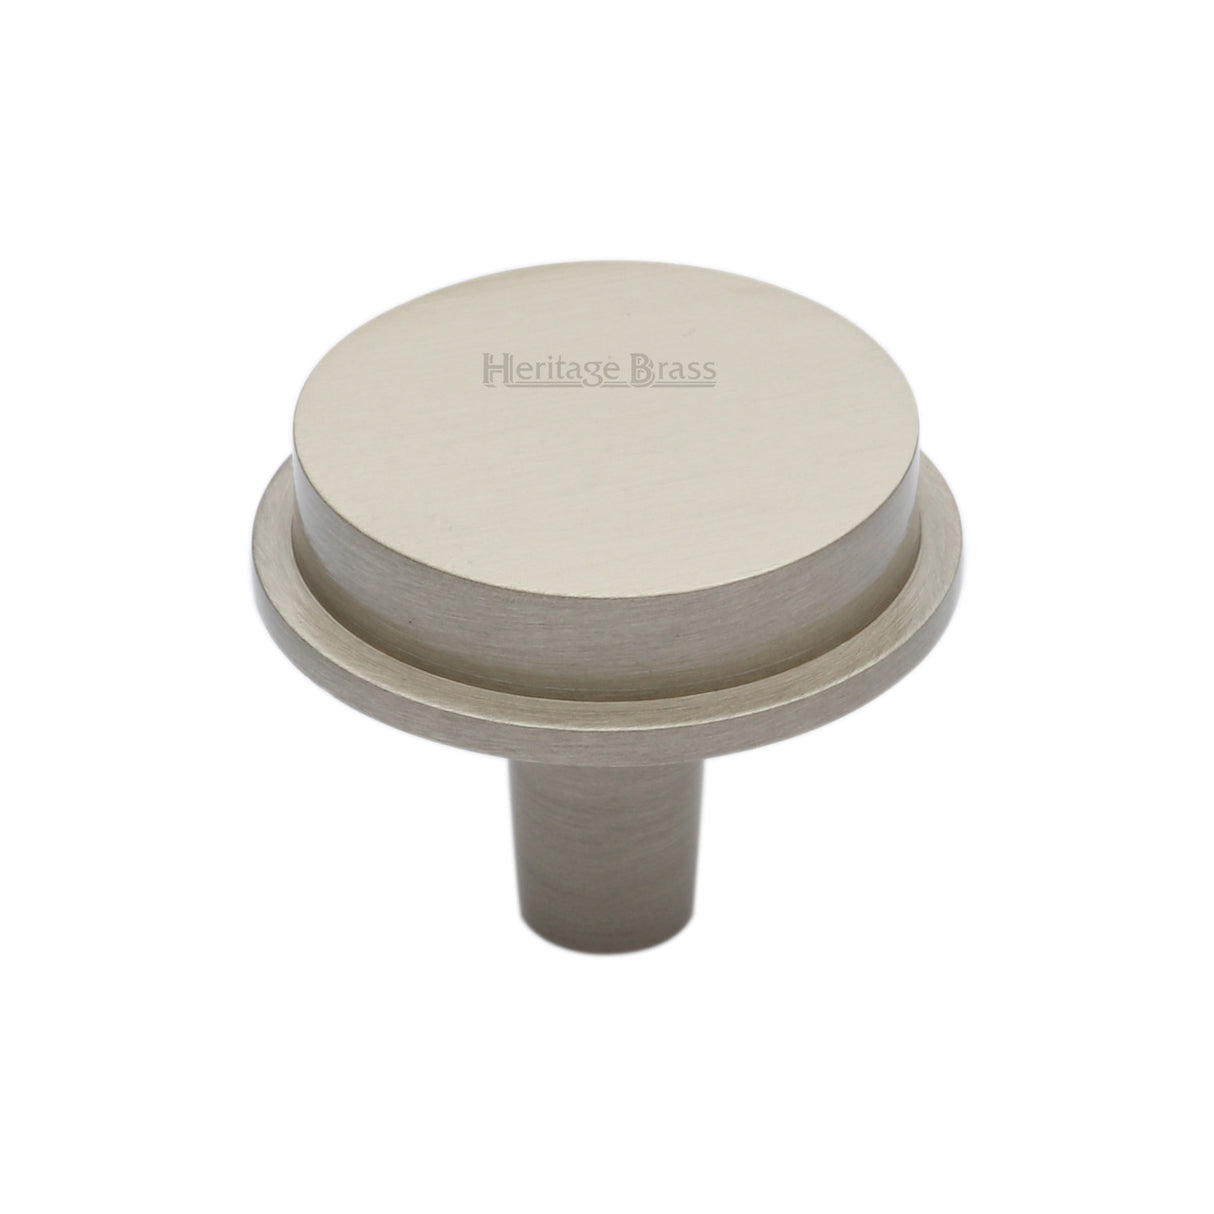 This is an image of a Heritage Brass - Flat Round Knob Design 32 mm Satin Nickel finish, c4592-32-sn that is available to order from Trade Door Handles in Kendal.